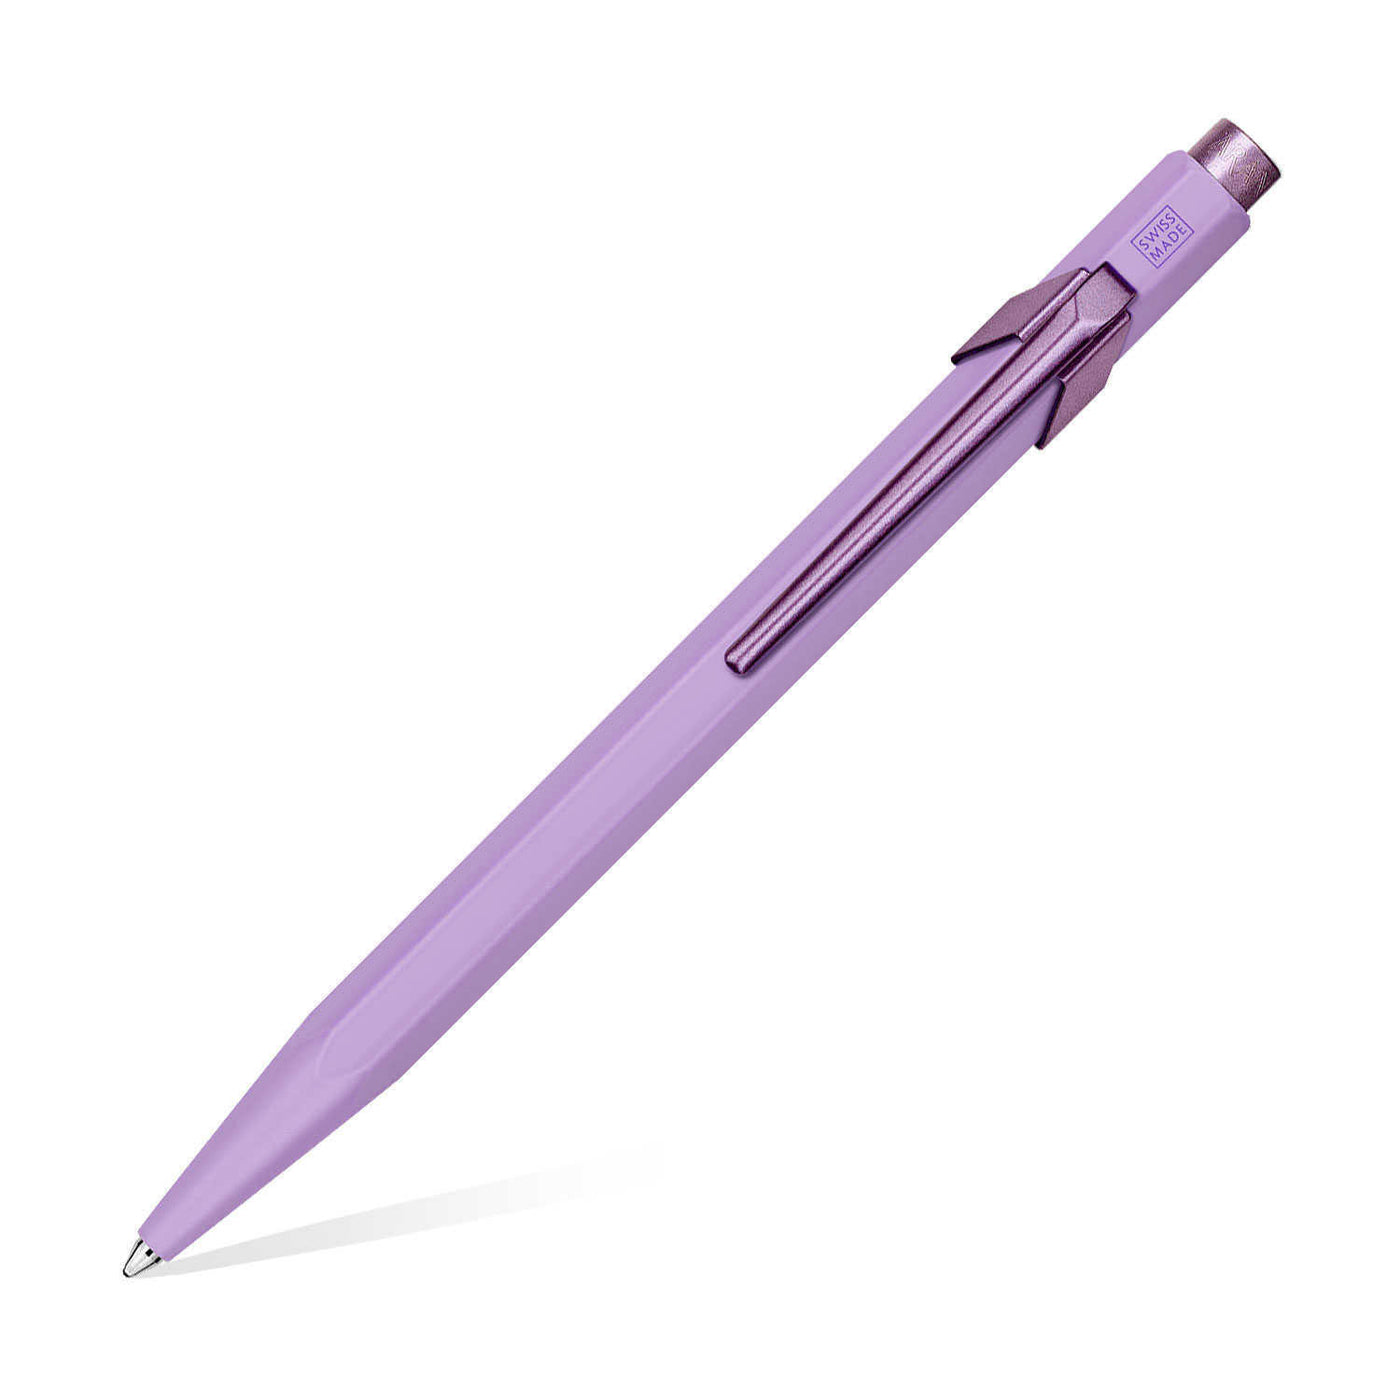 Caran d'Ache 849 Claim Your Style Ball Pen - Violet (Limited Edition) 1